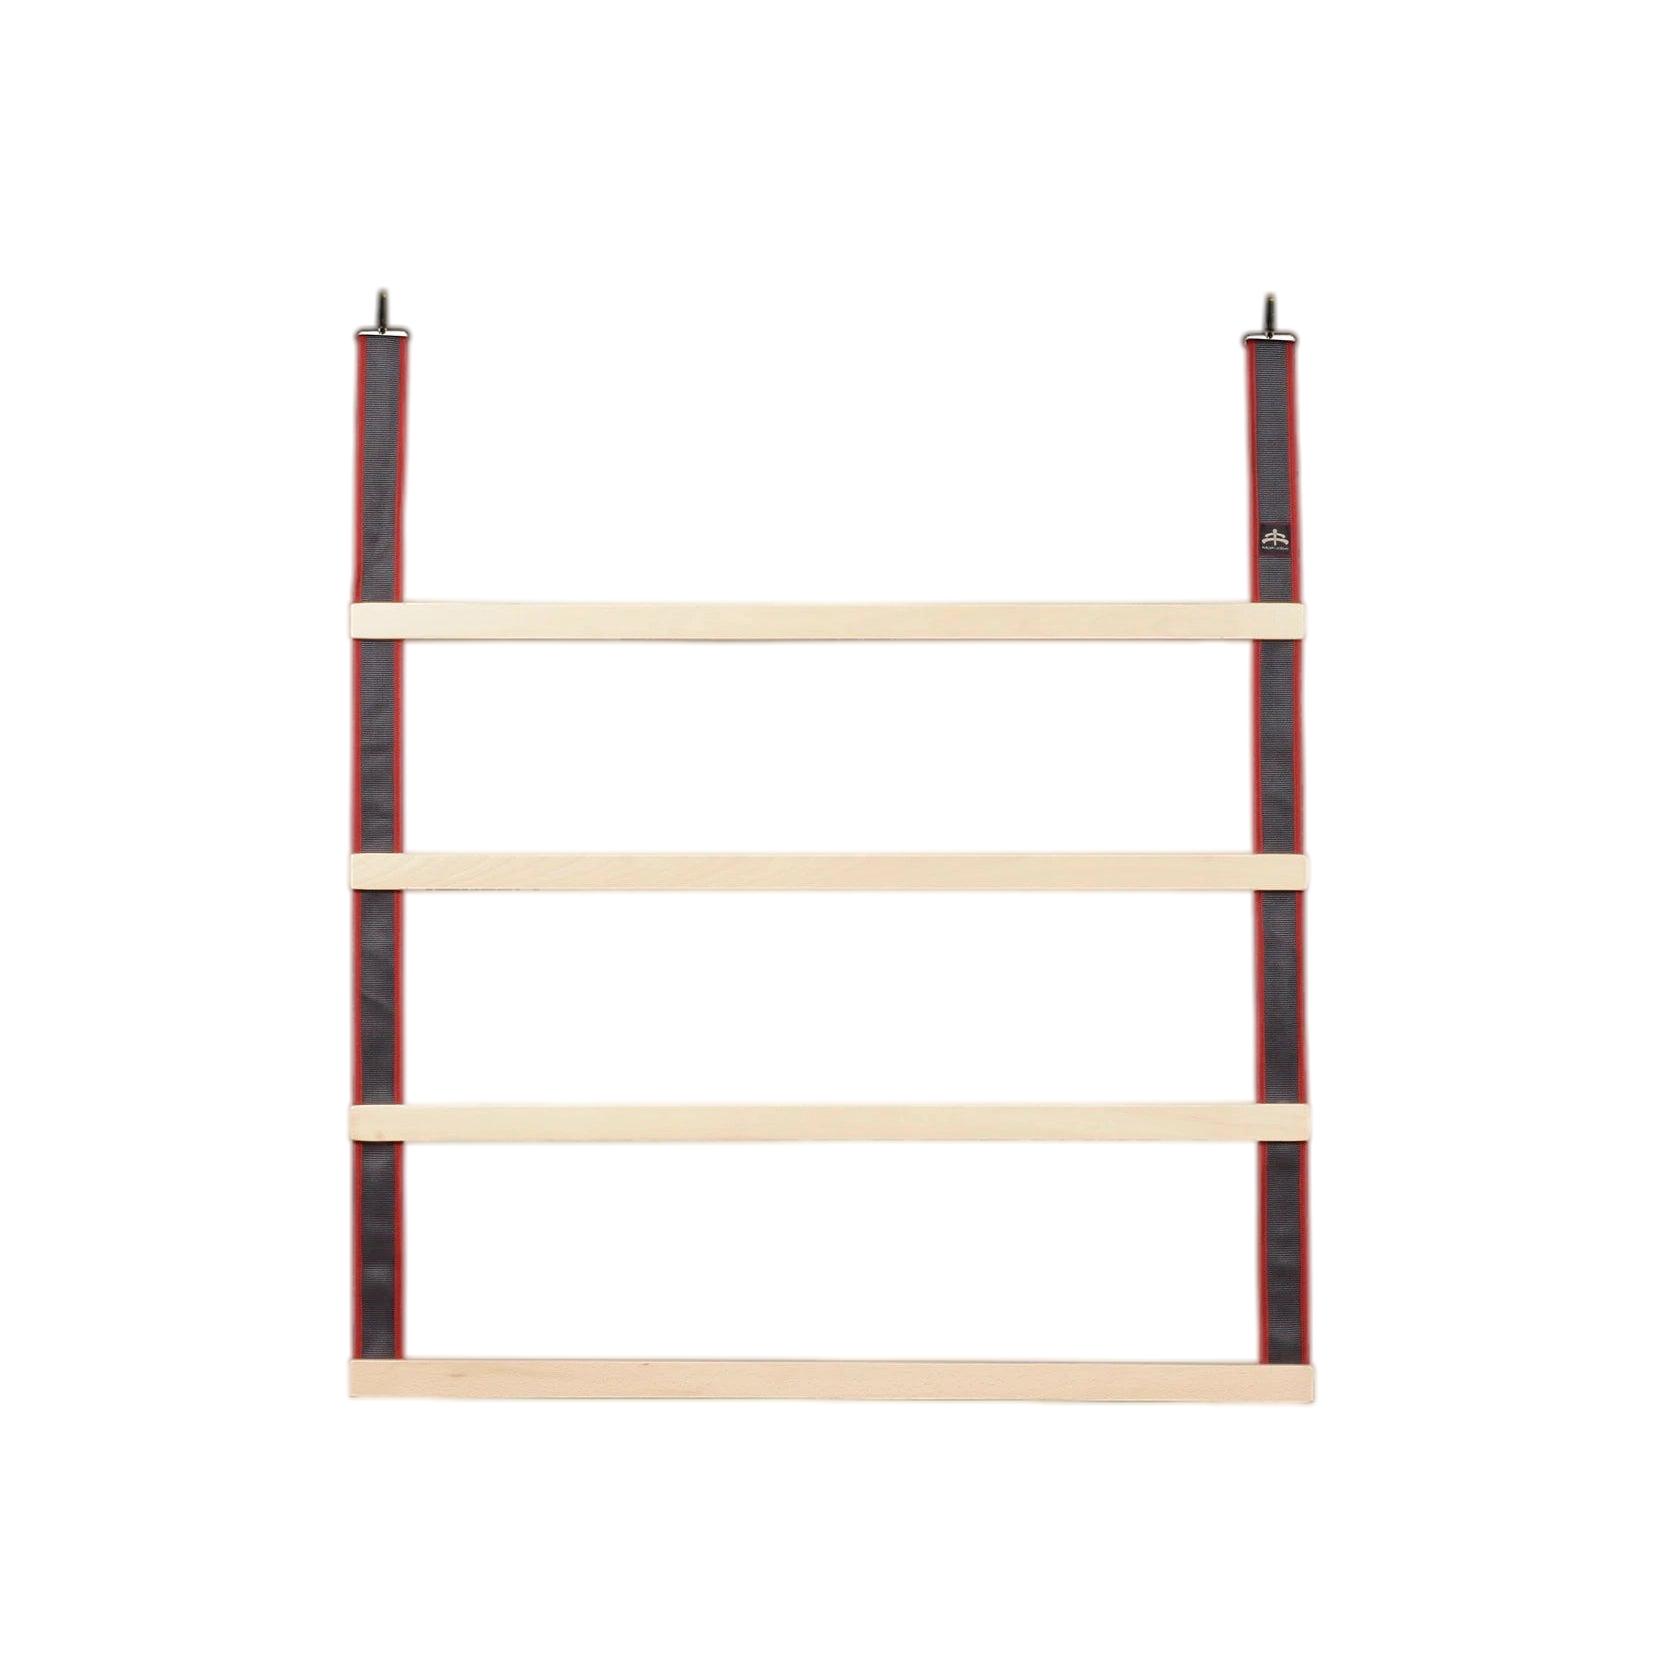 Rugs and Saddle Pads Hanger